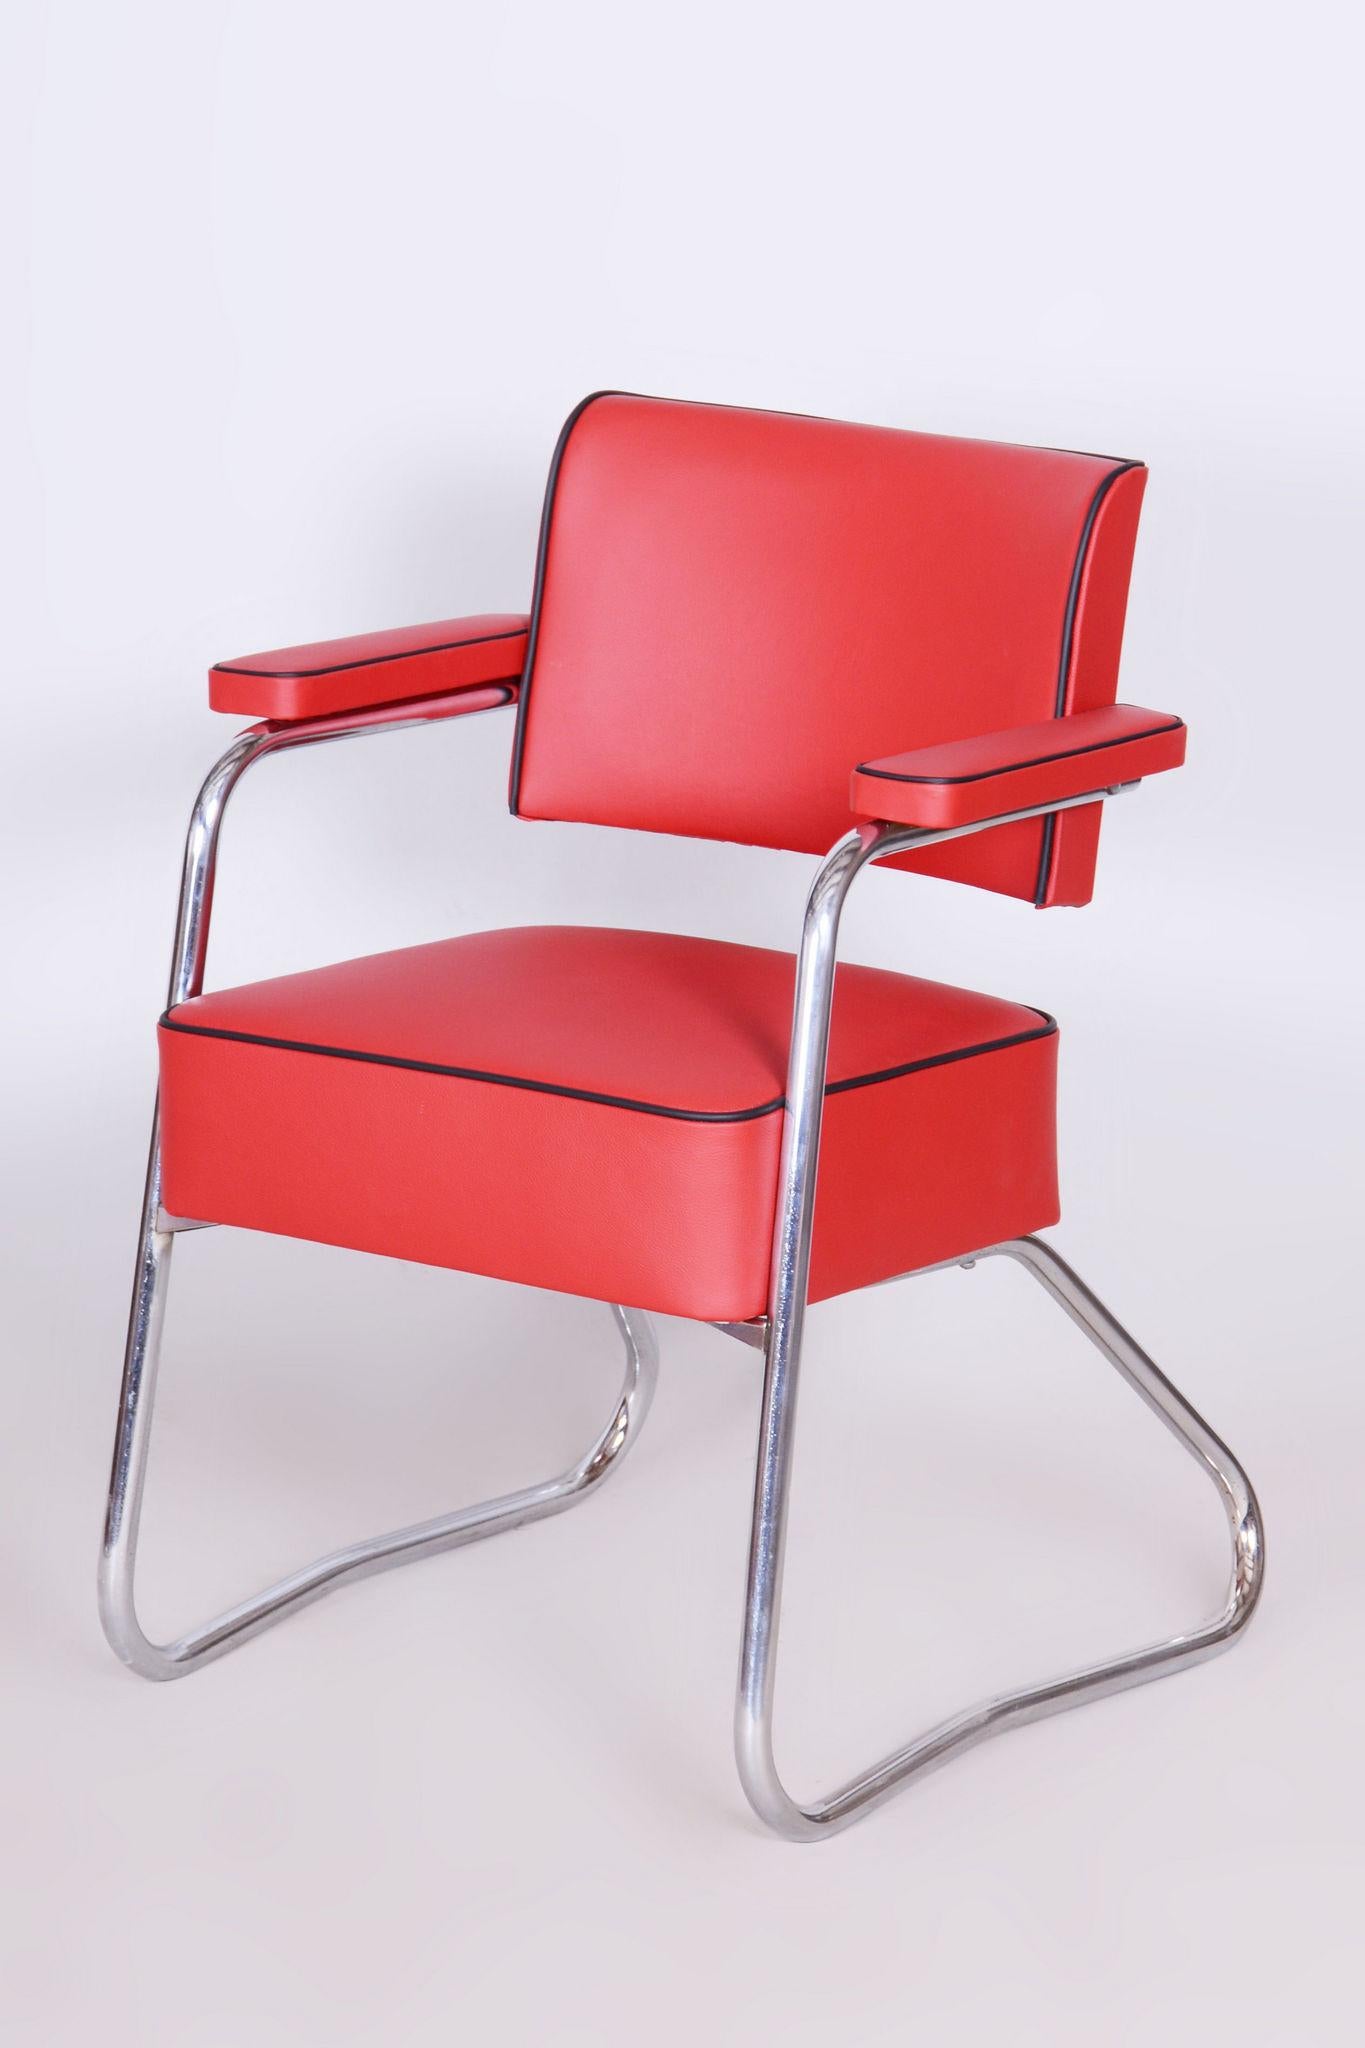 Restored Bauhaus Armchair, Mauser, G. Rohde, Chrome, Leather, Germany, 1930s For Sale 4